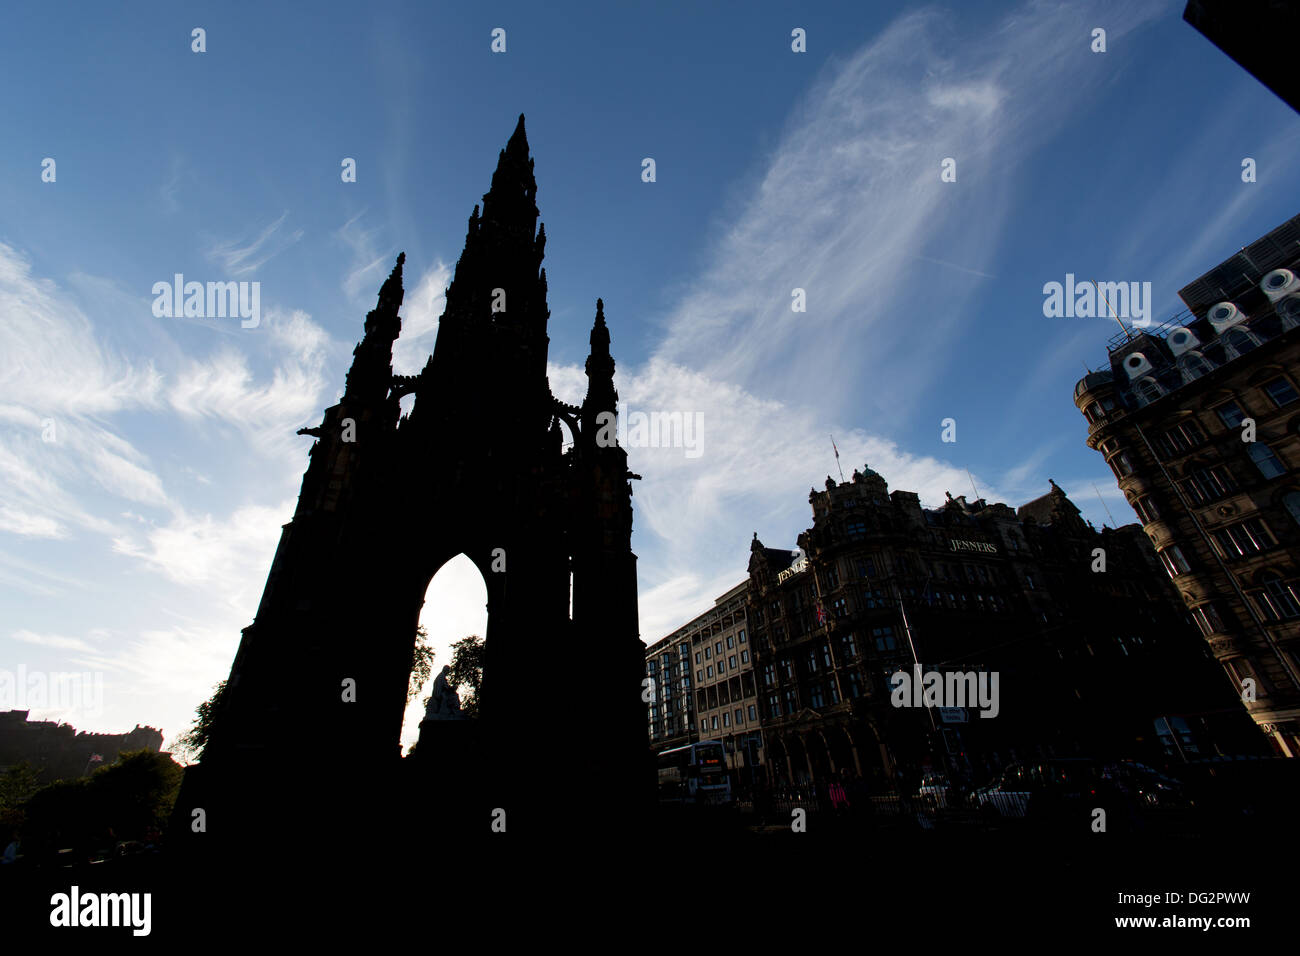 City of Edinburgh, Scotland. Silhouetted view of Princes Street with the Scott Monument in the foreground. Stock Photo